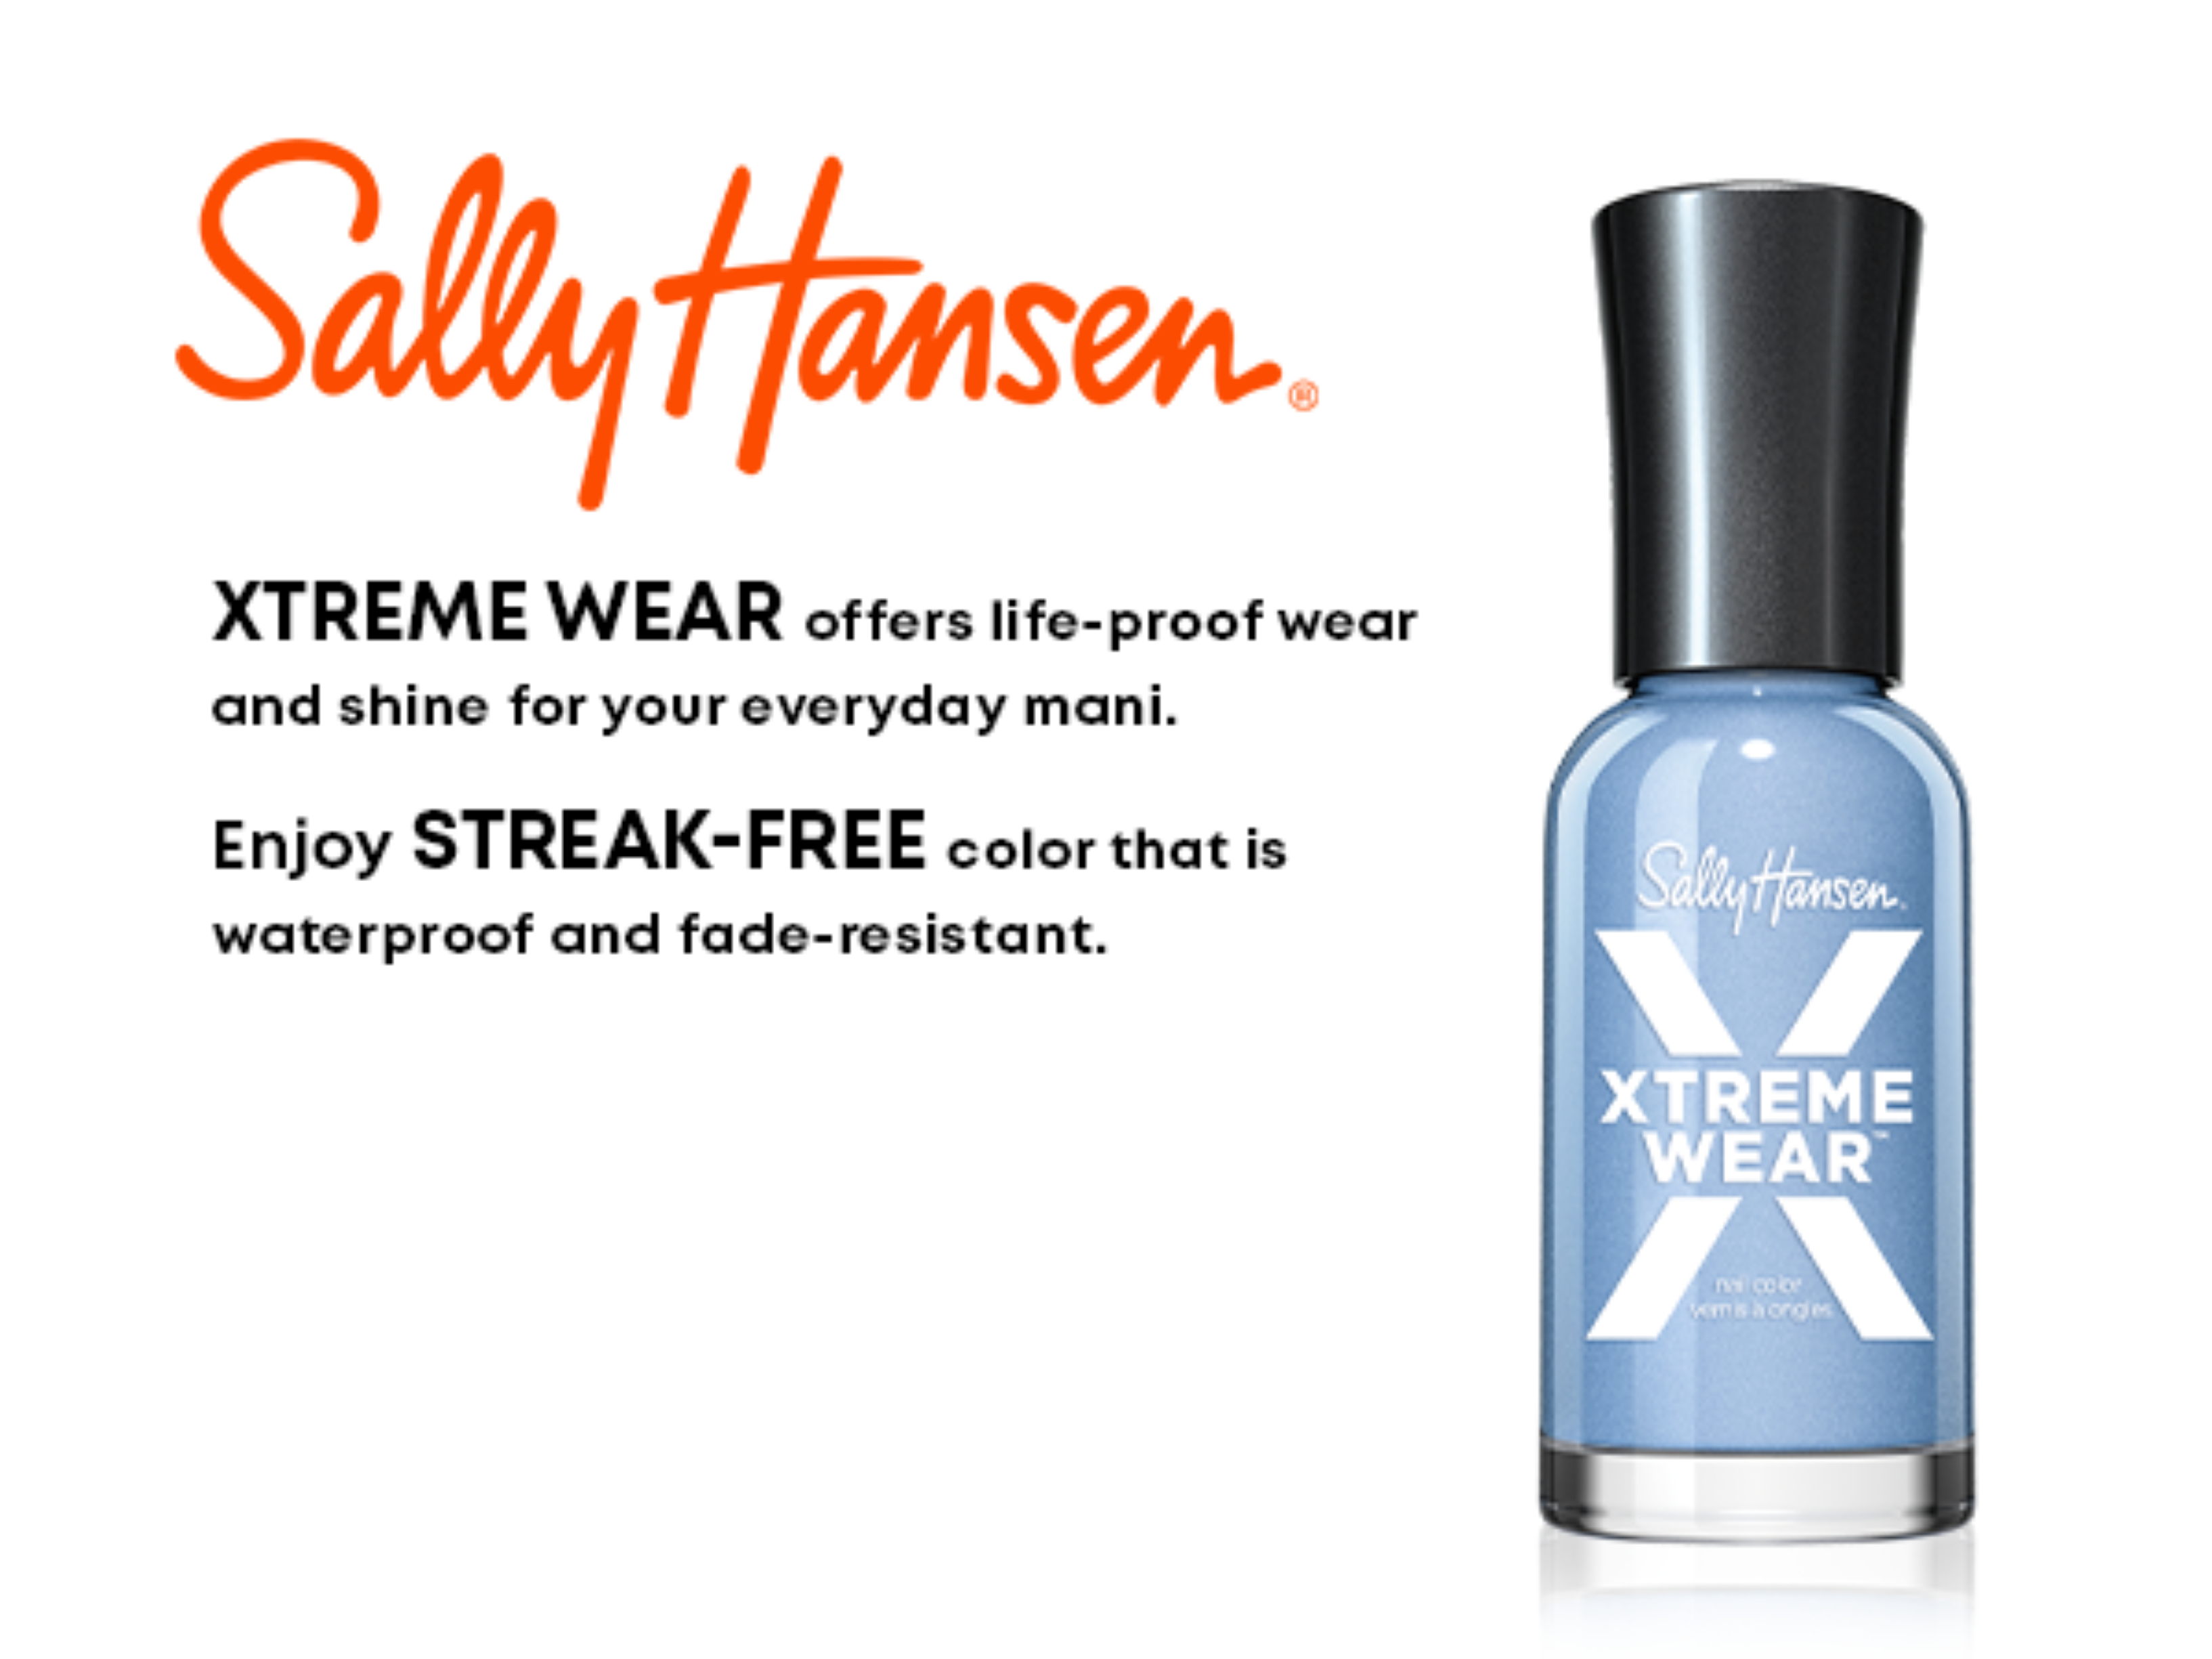 Sally Hansen Xtreme Wear Nail Polish, Pixie Peach, 0.4 oz, Chip Resistant, Bold Color - image 5 of 14